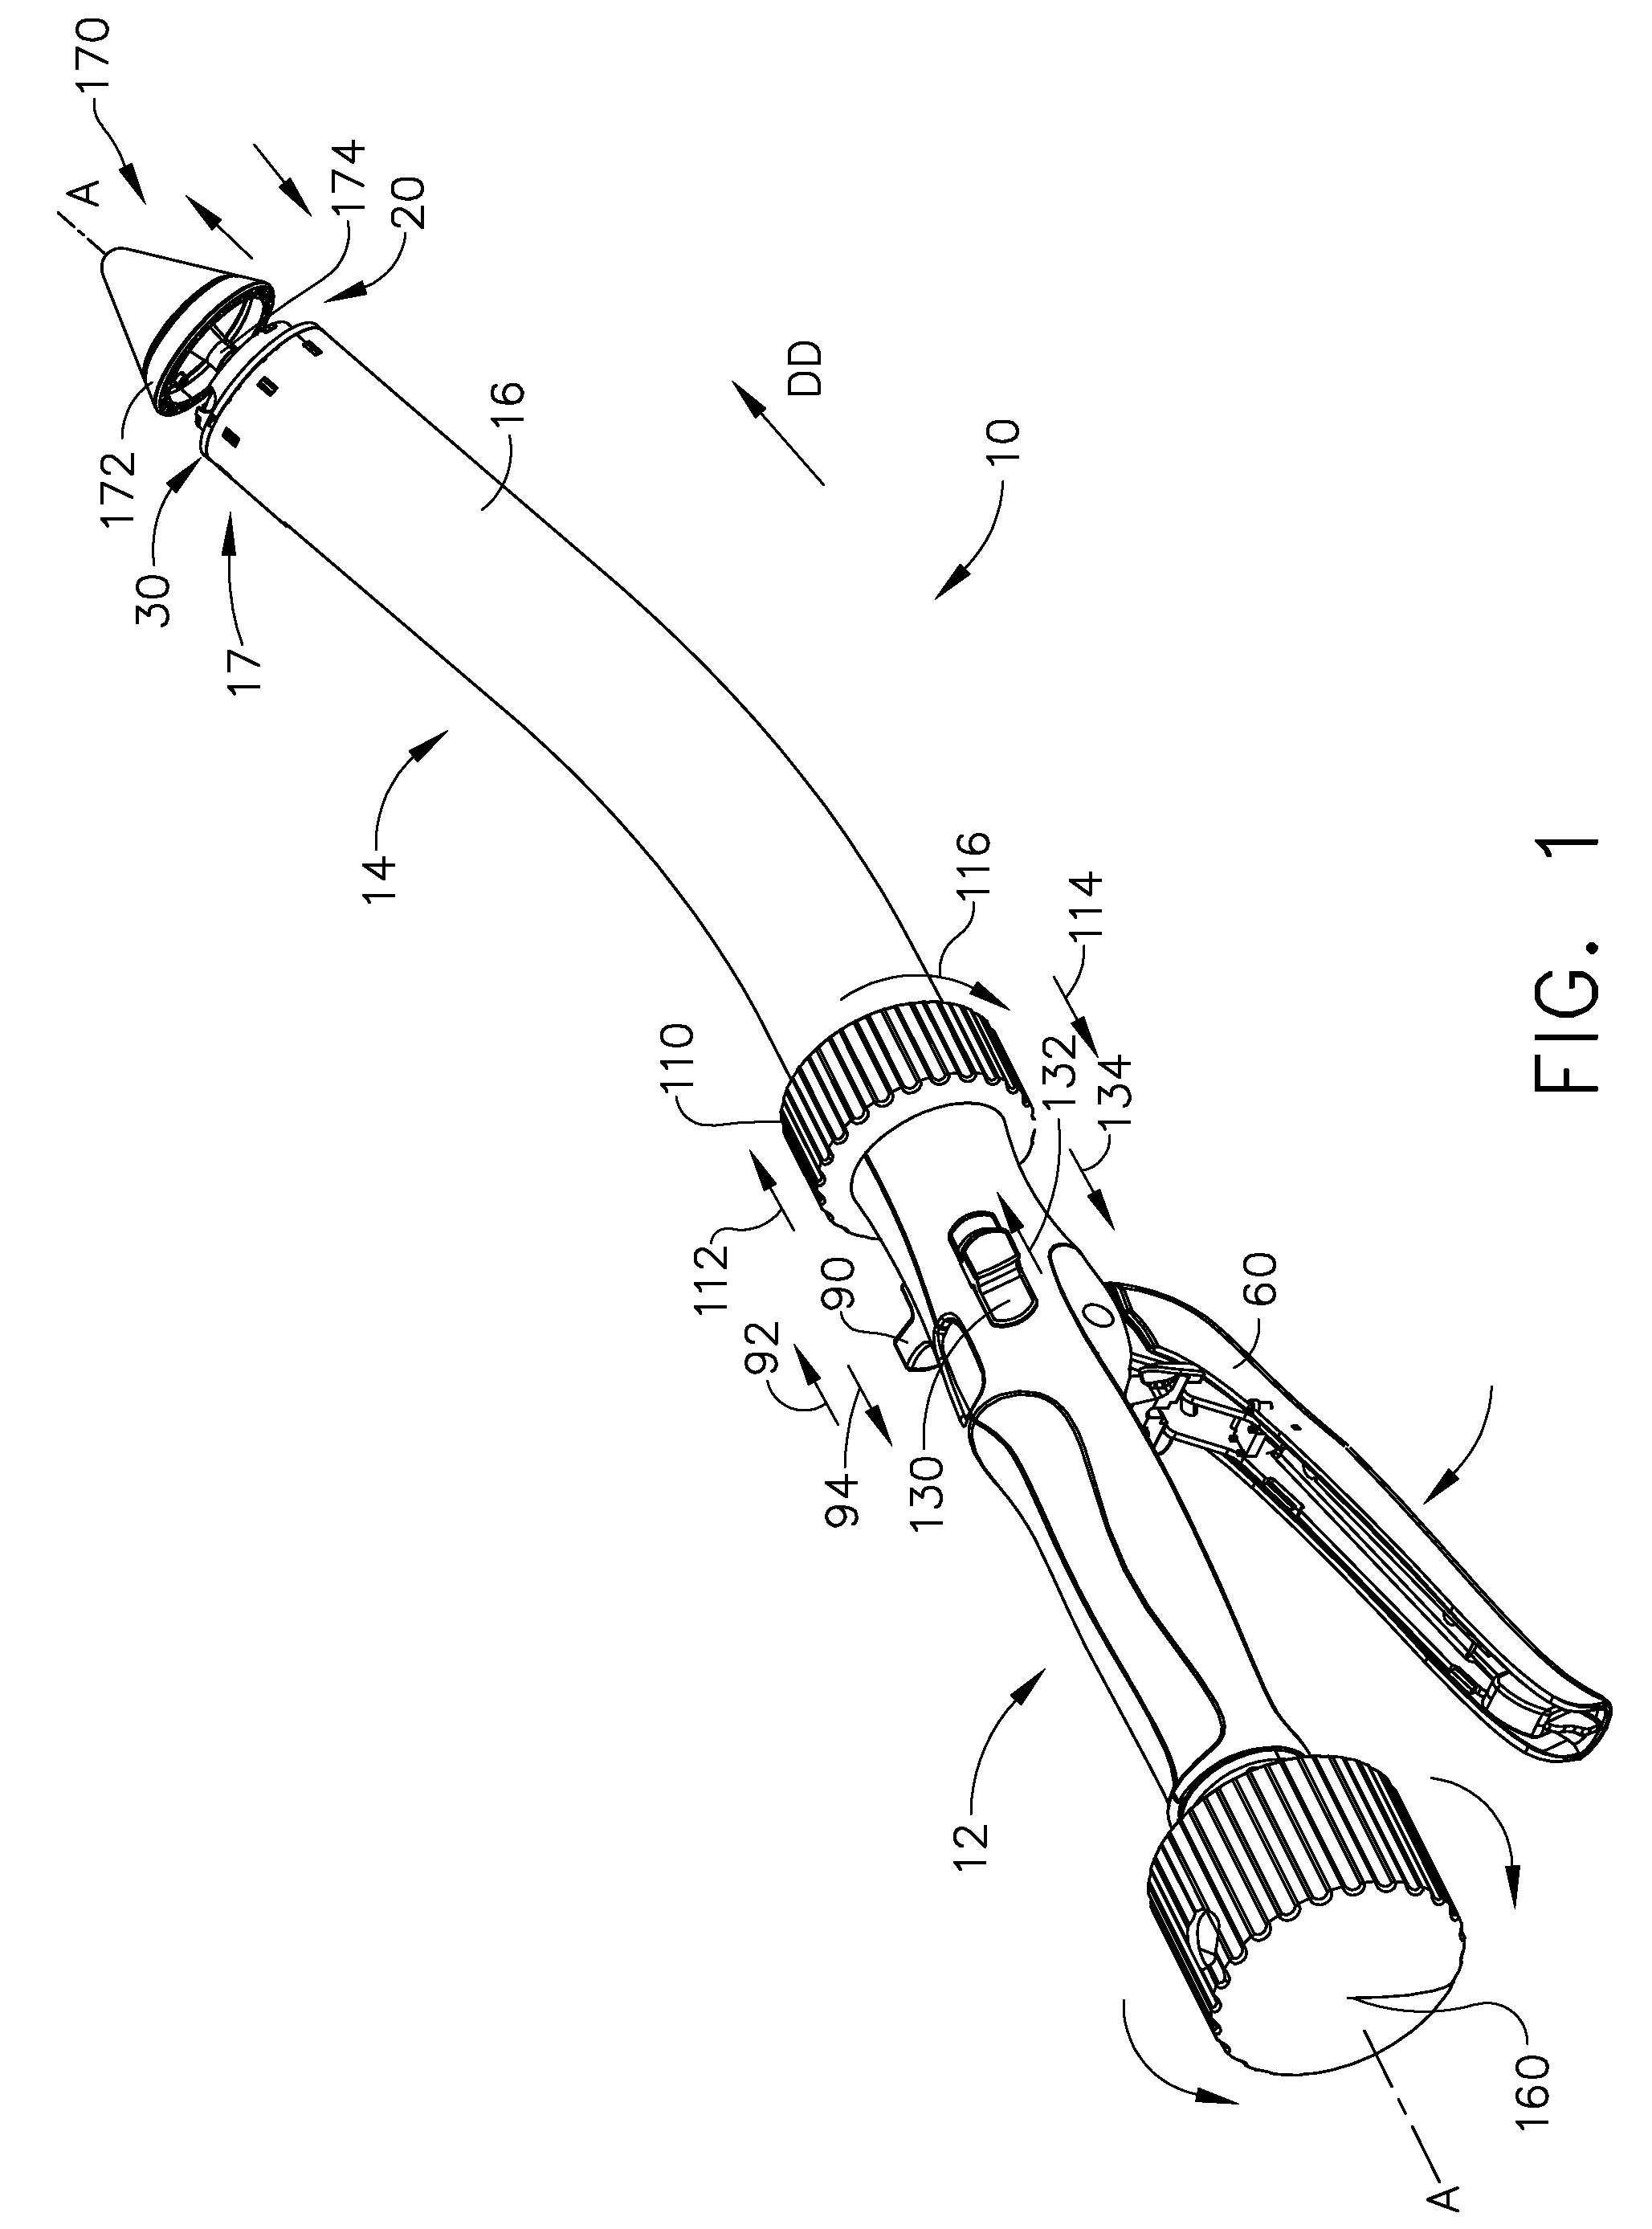 Transwall visualization arrangements and methods for surgical circular staplers